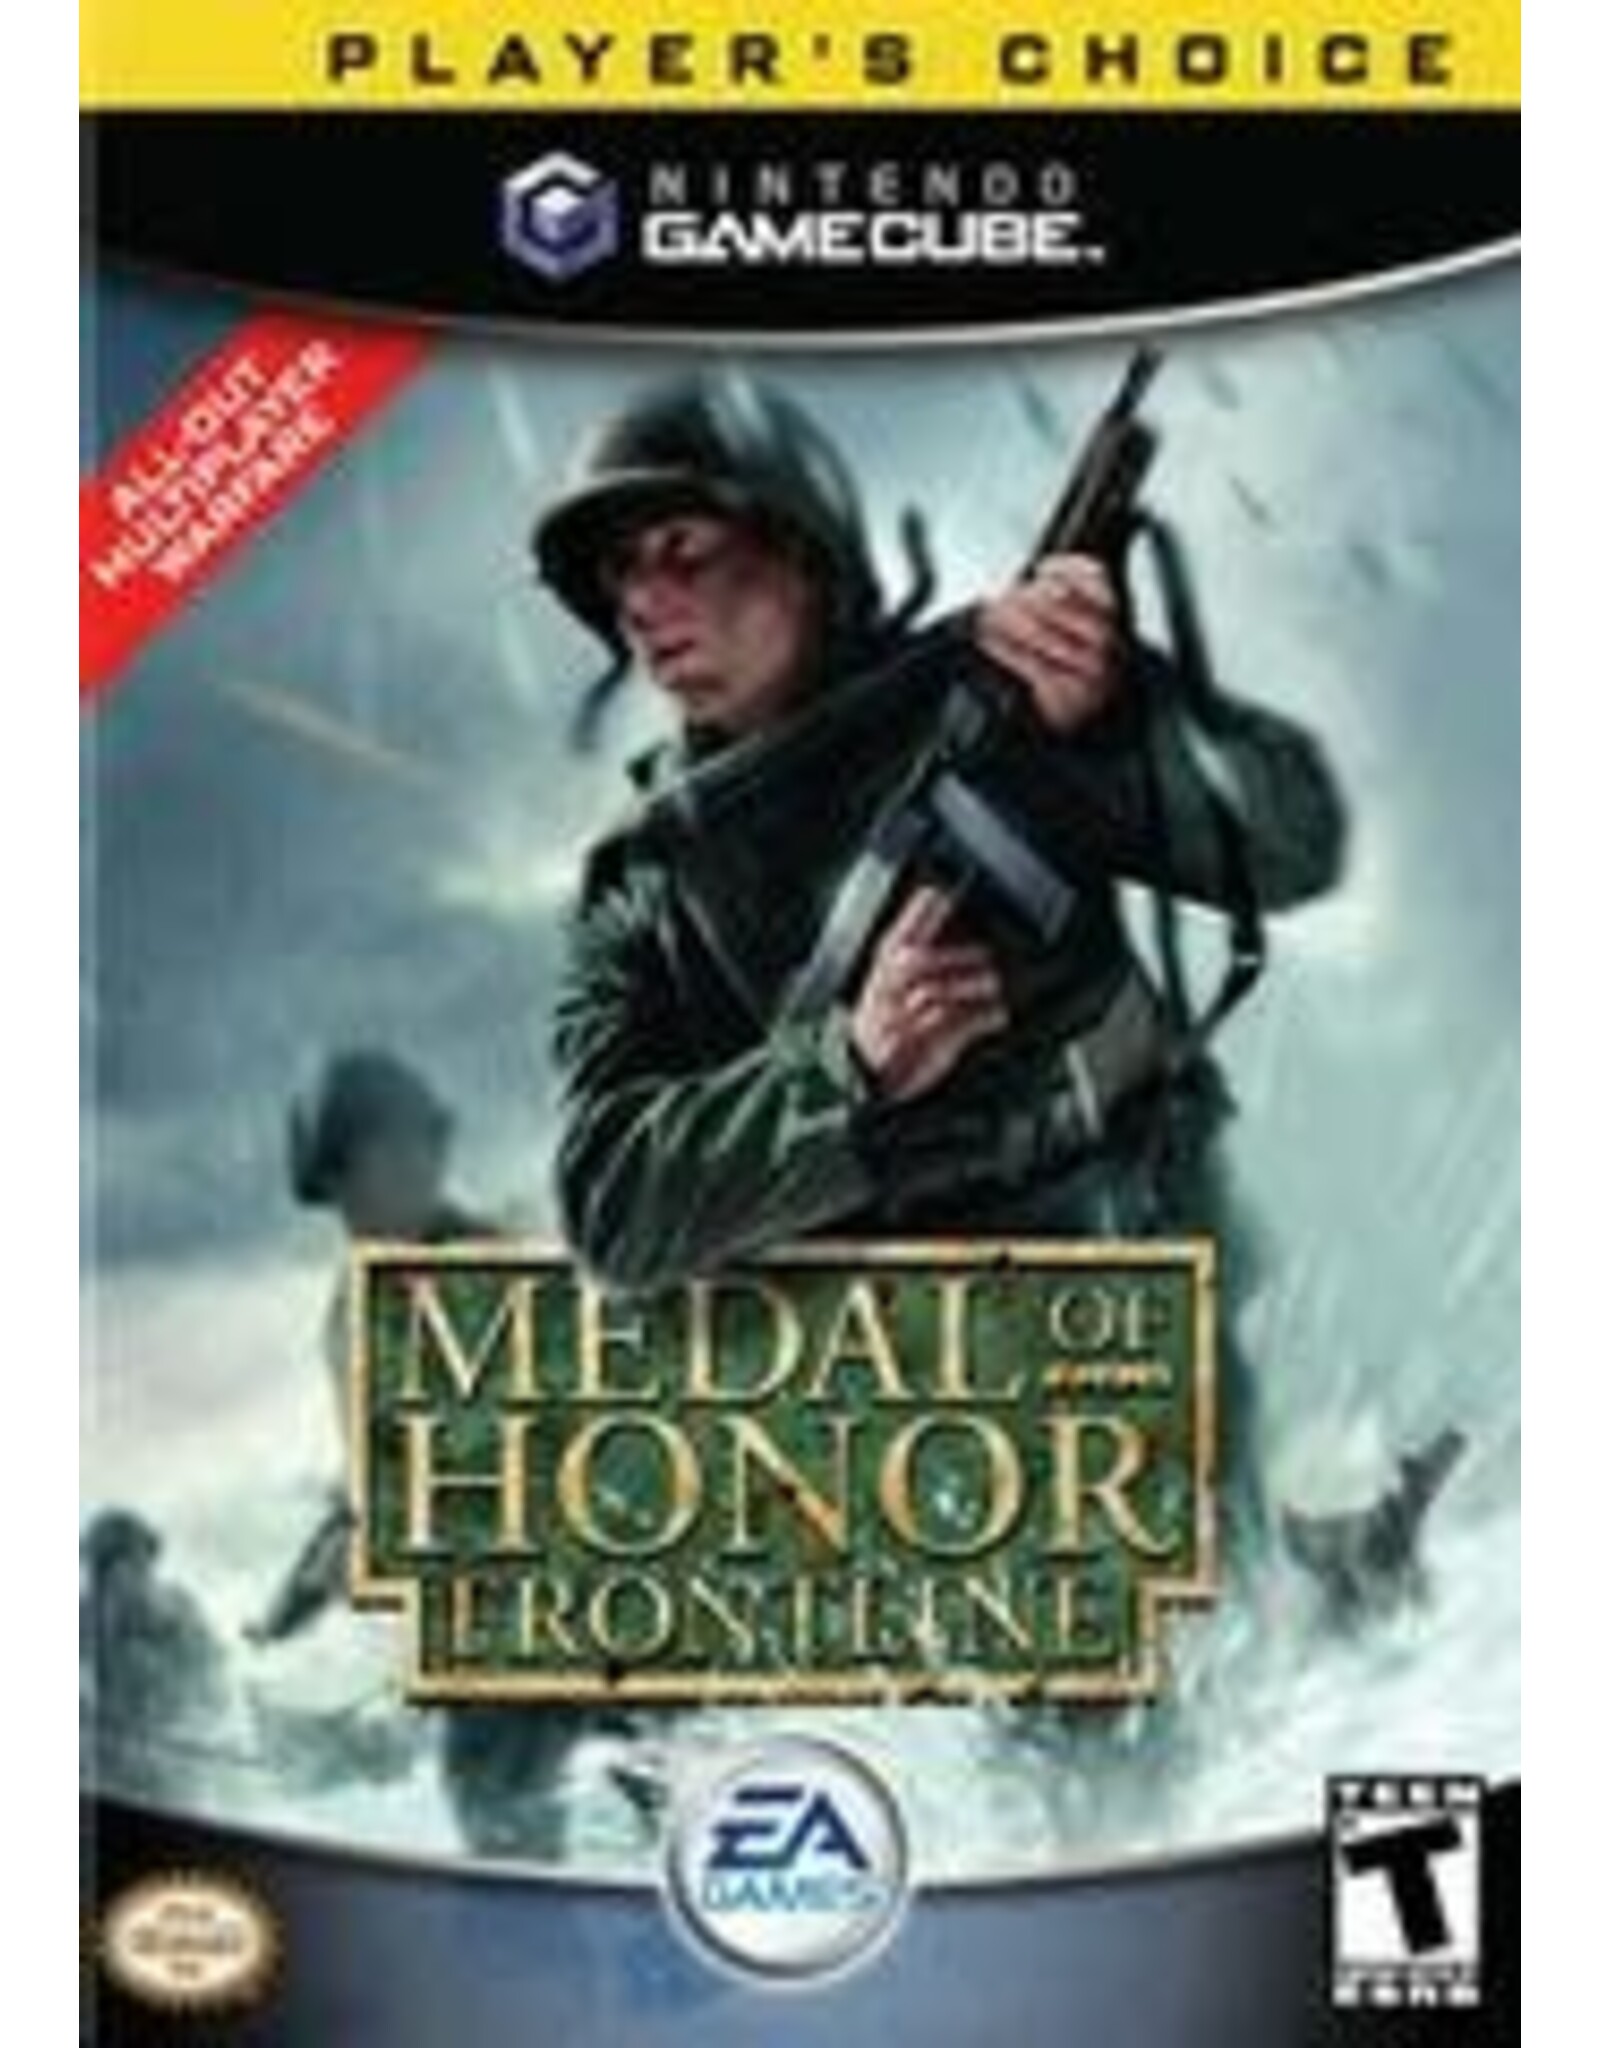 Gamecube Medal of Honor Frontline (Player's Choice, CiB)